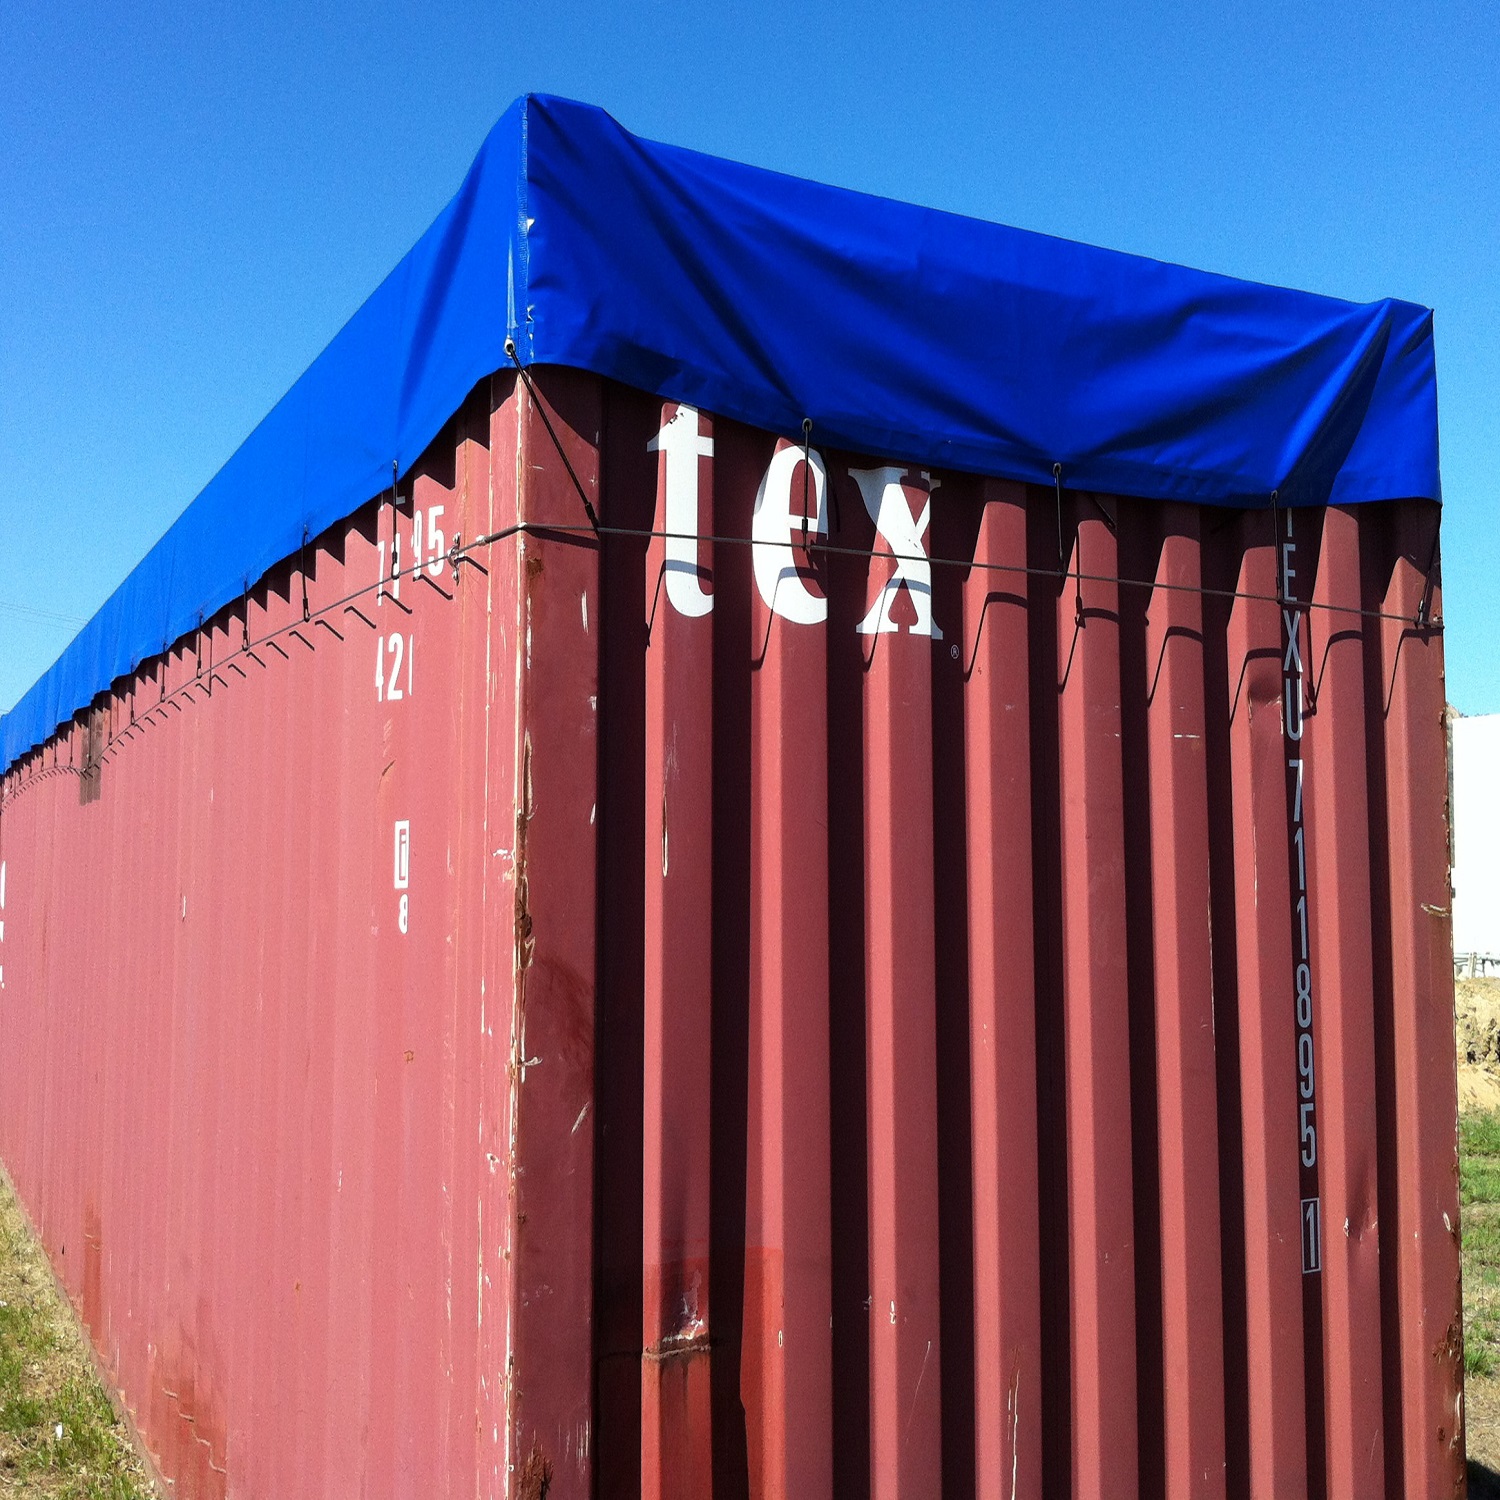 Shipping Container Tarps